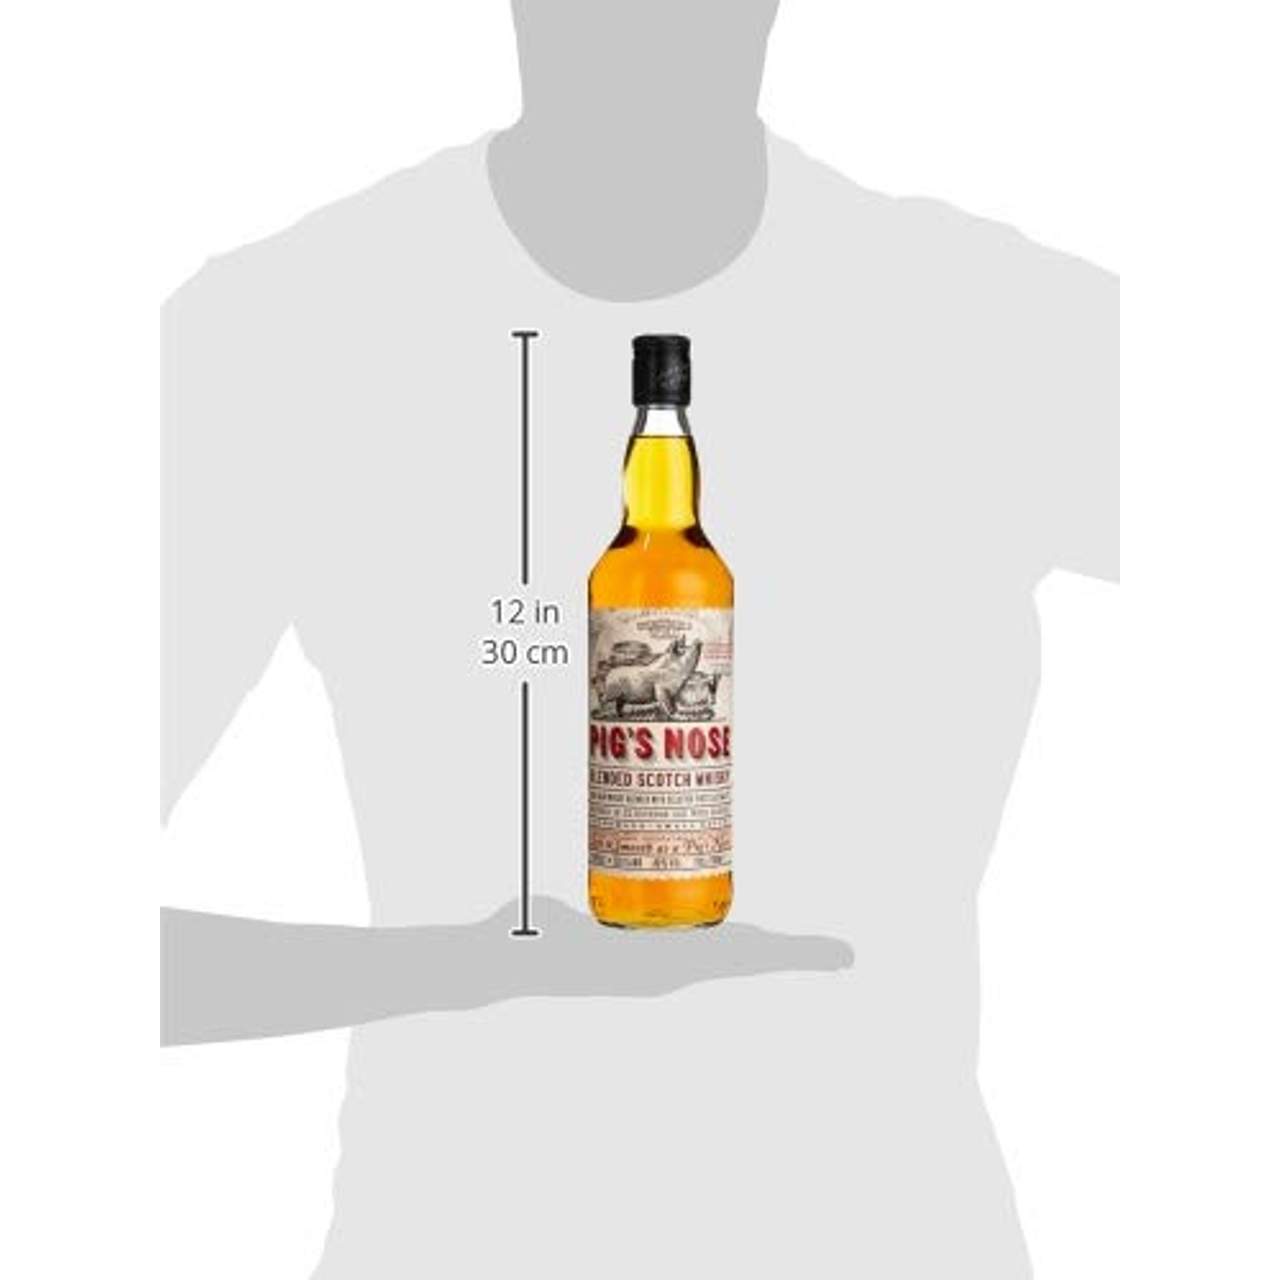 Pig's Nose 5 Jahre Blended Scotch Whisky